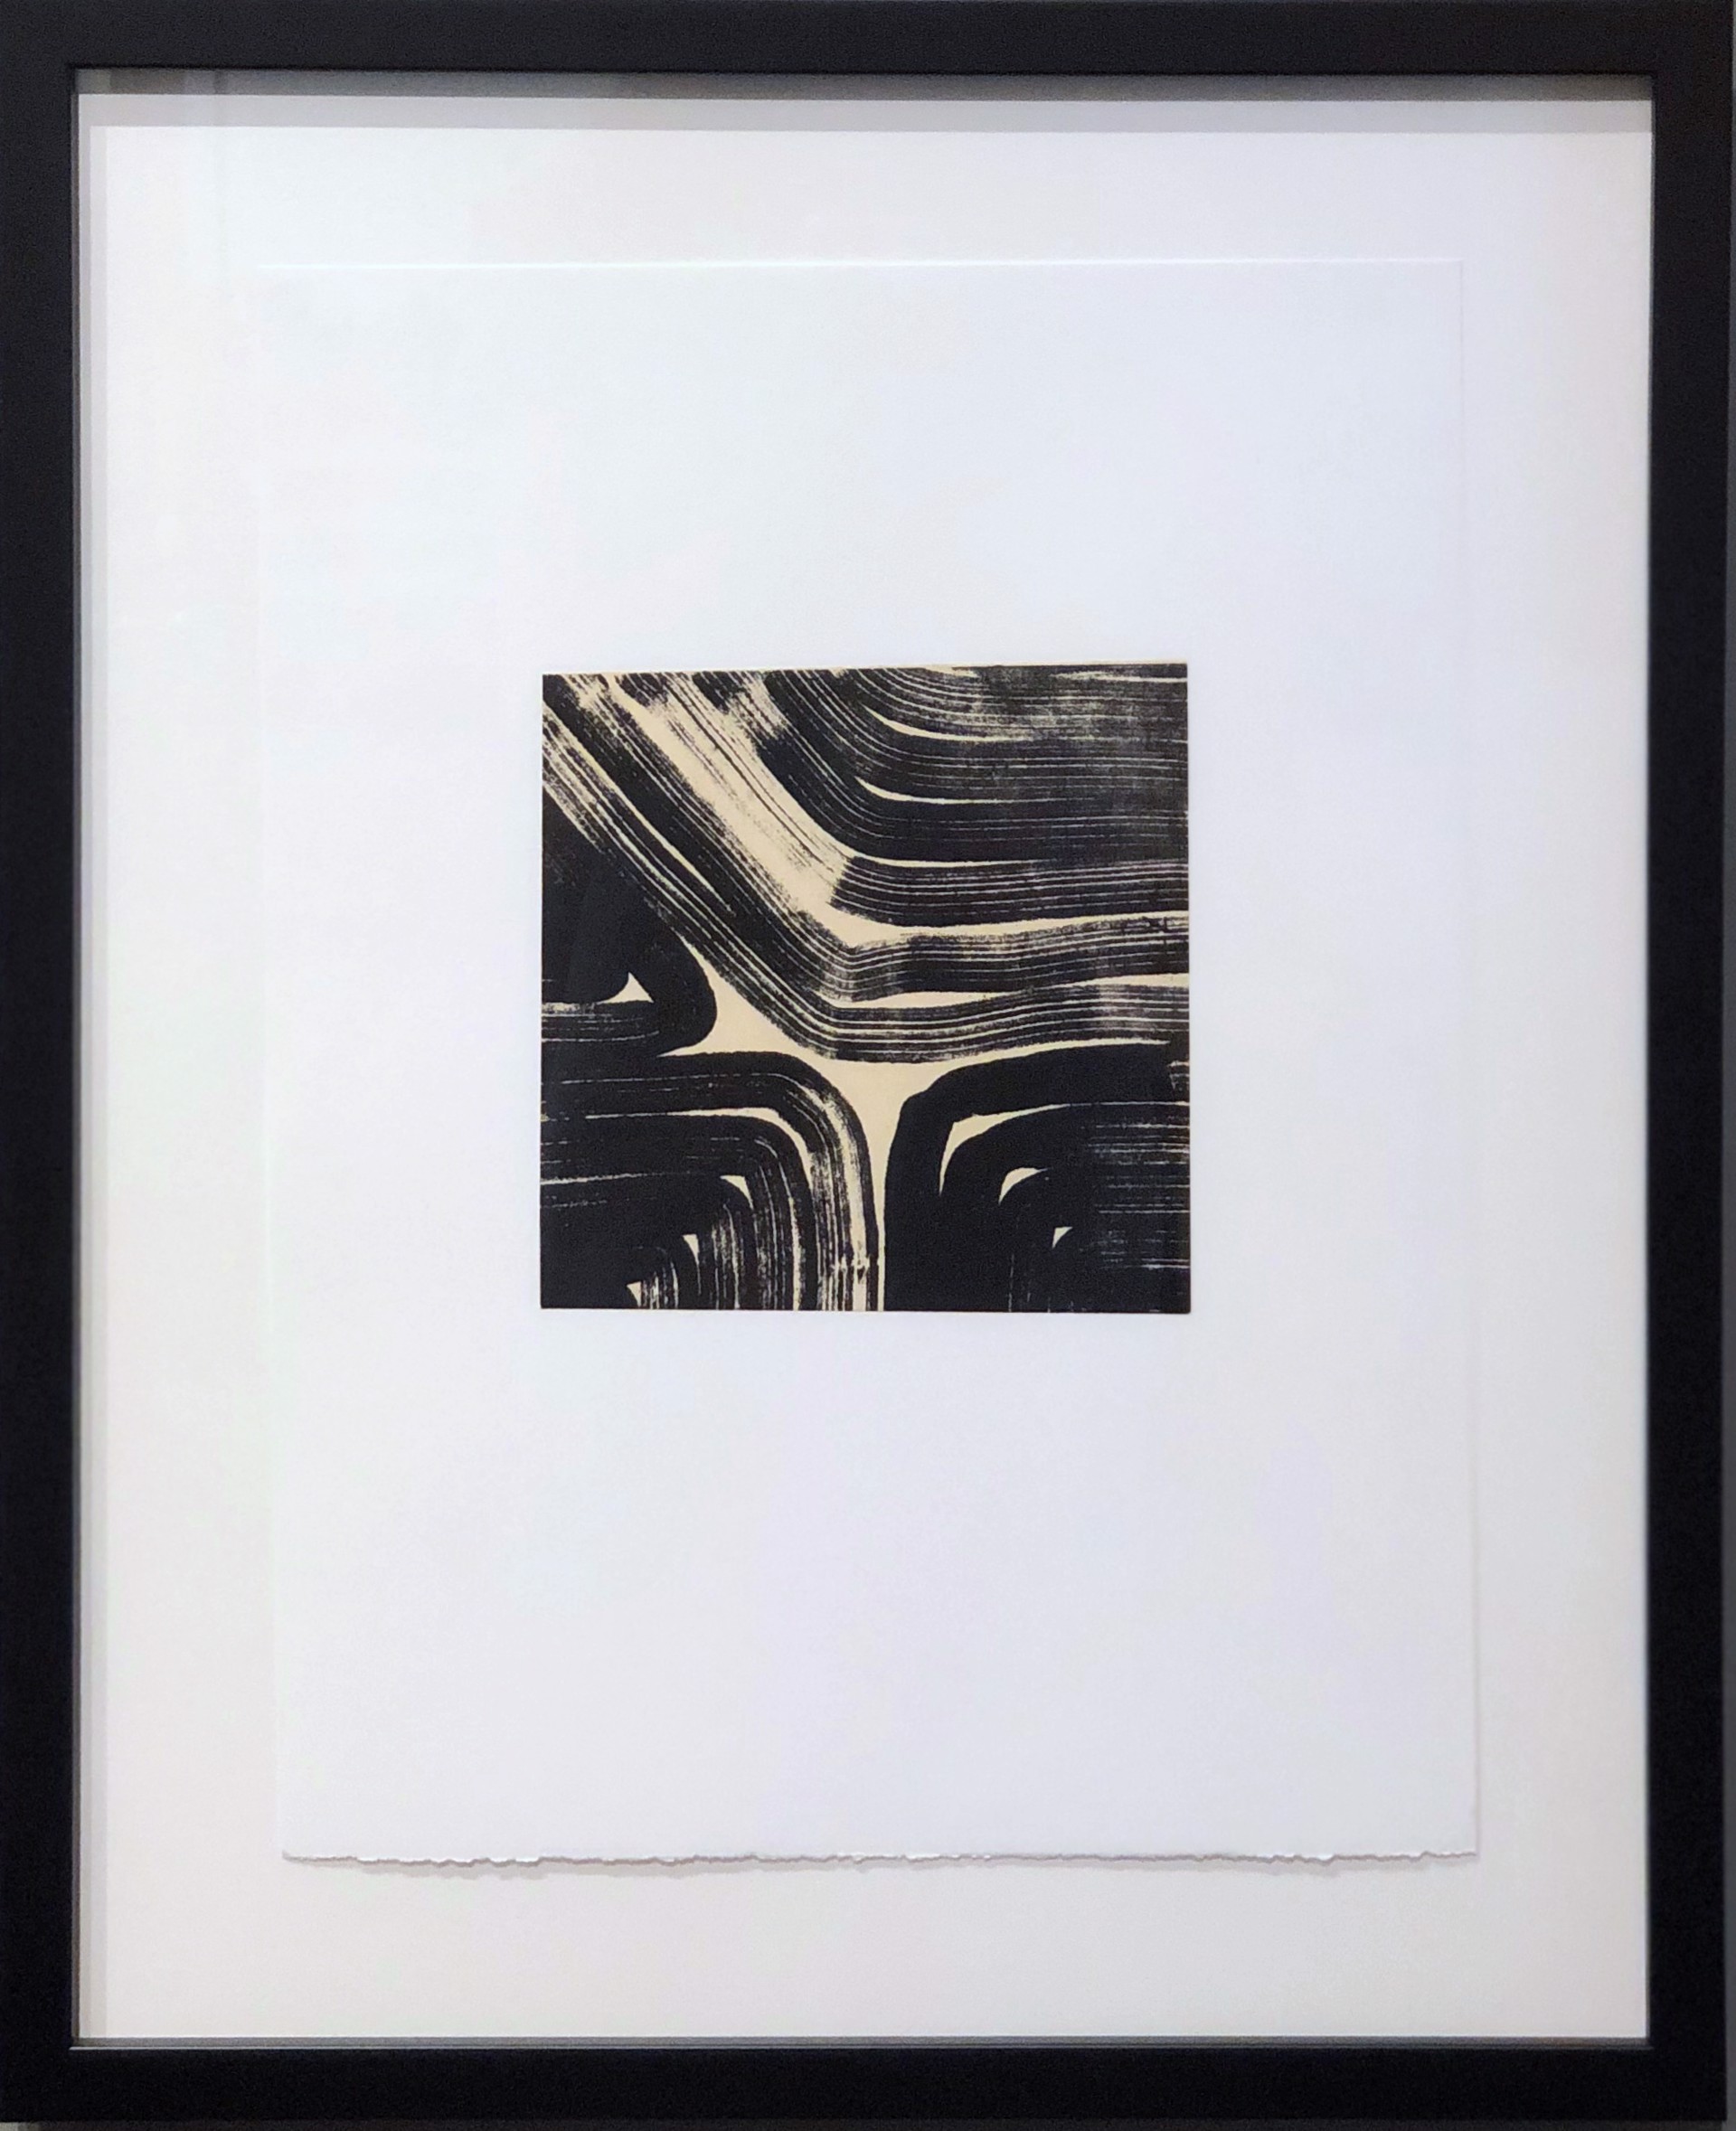 SOLD - Linear 3 by Elvia Perrin